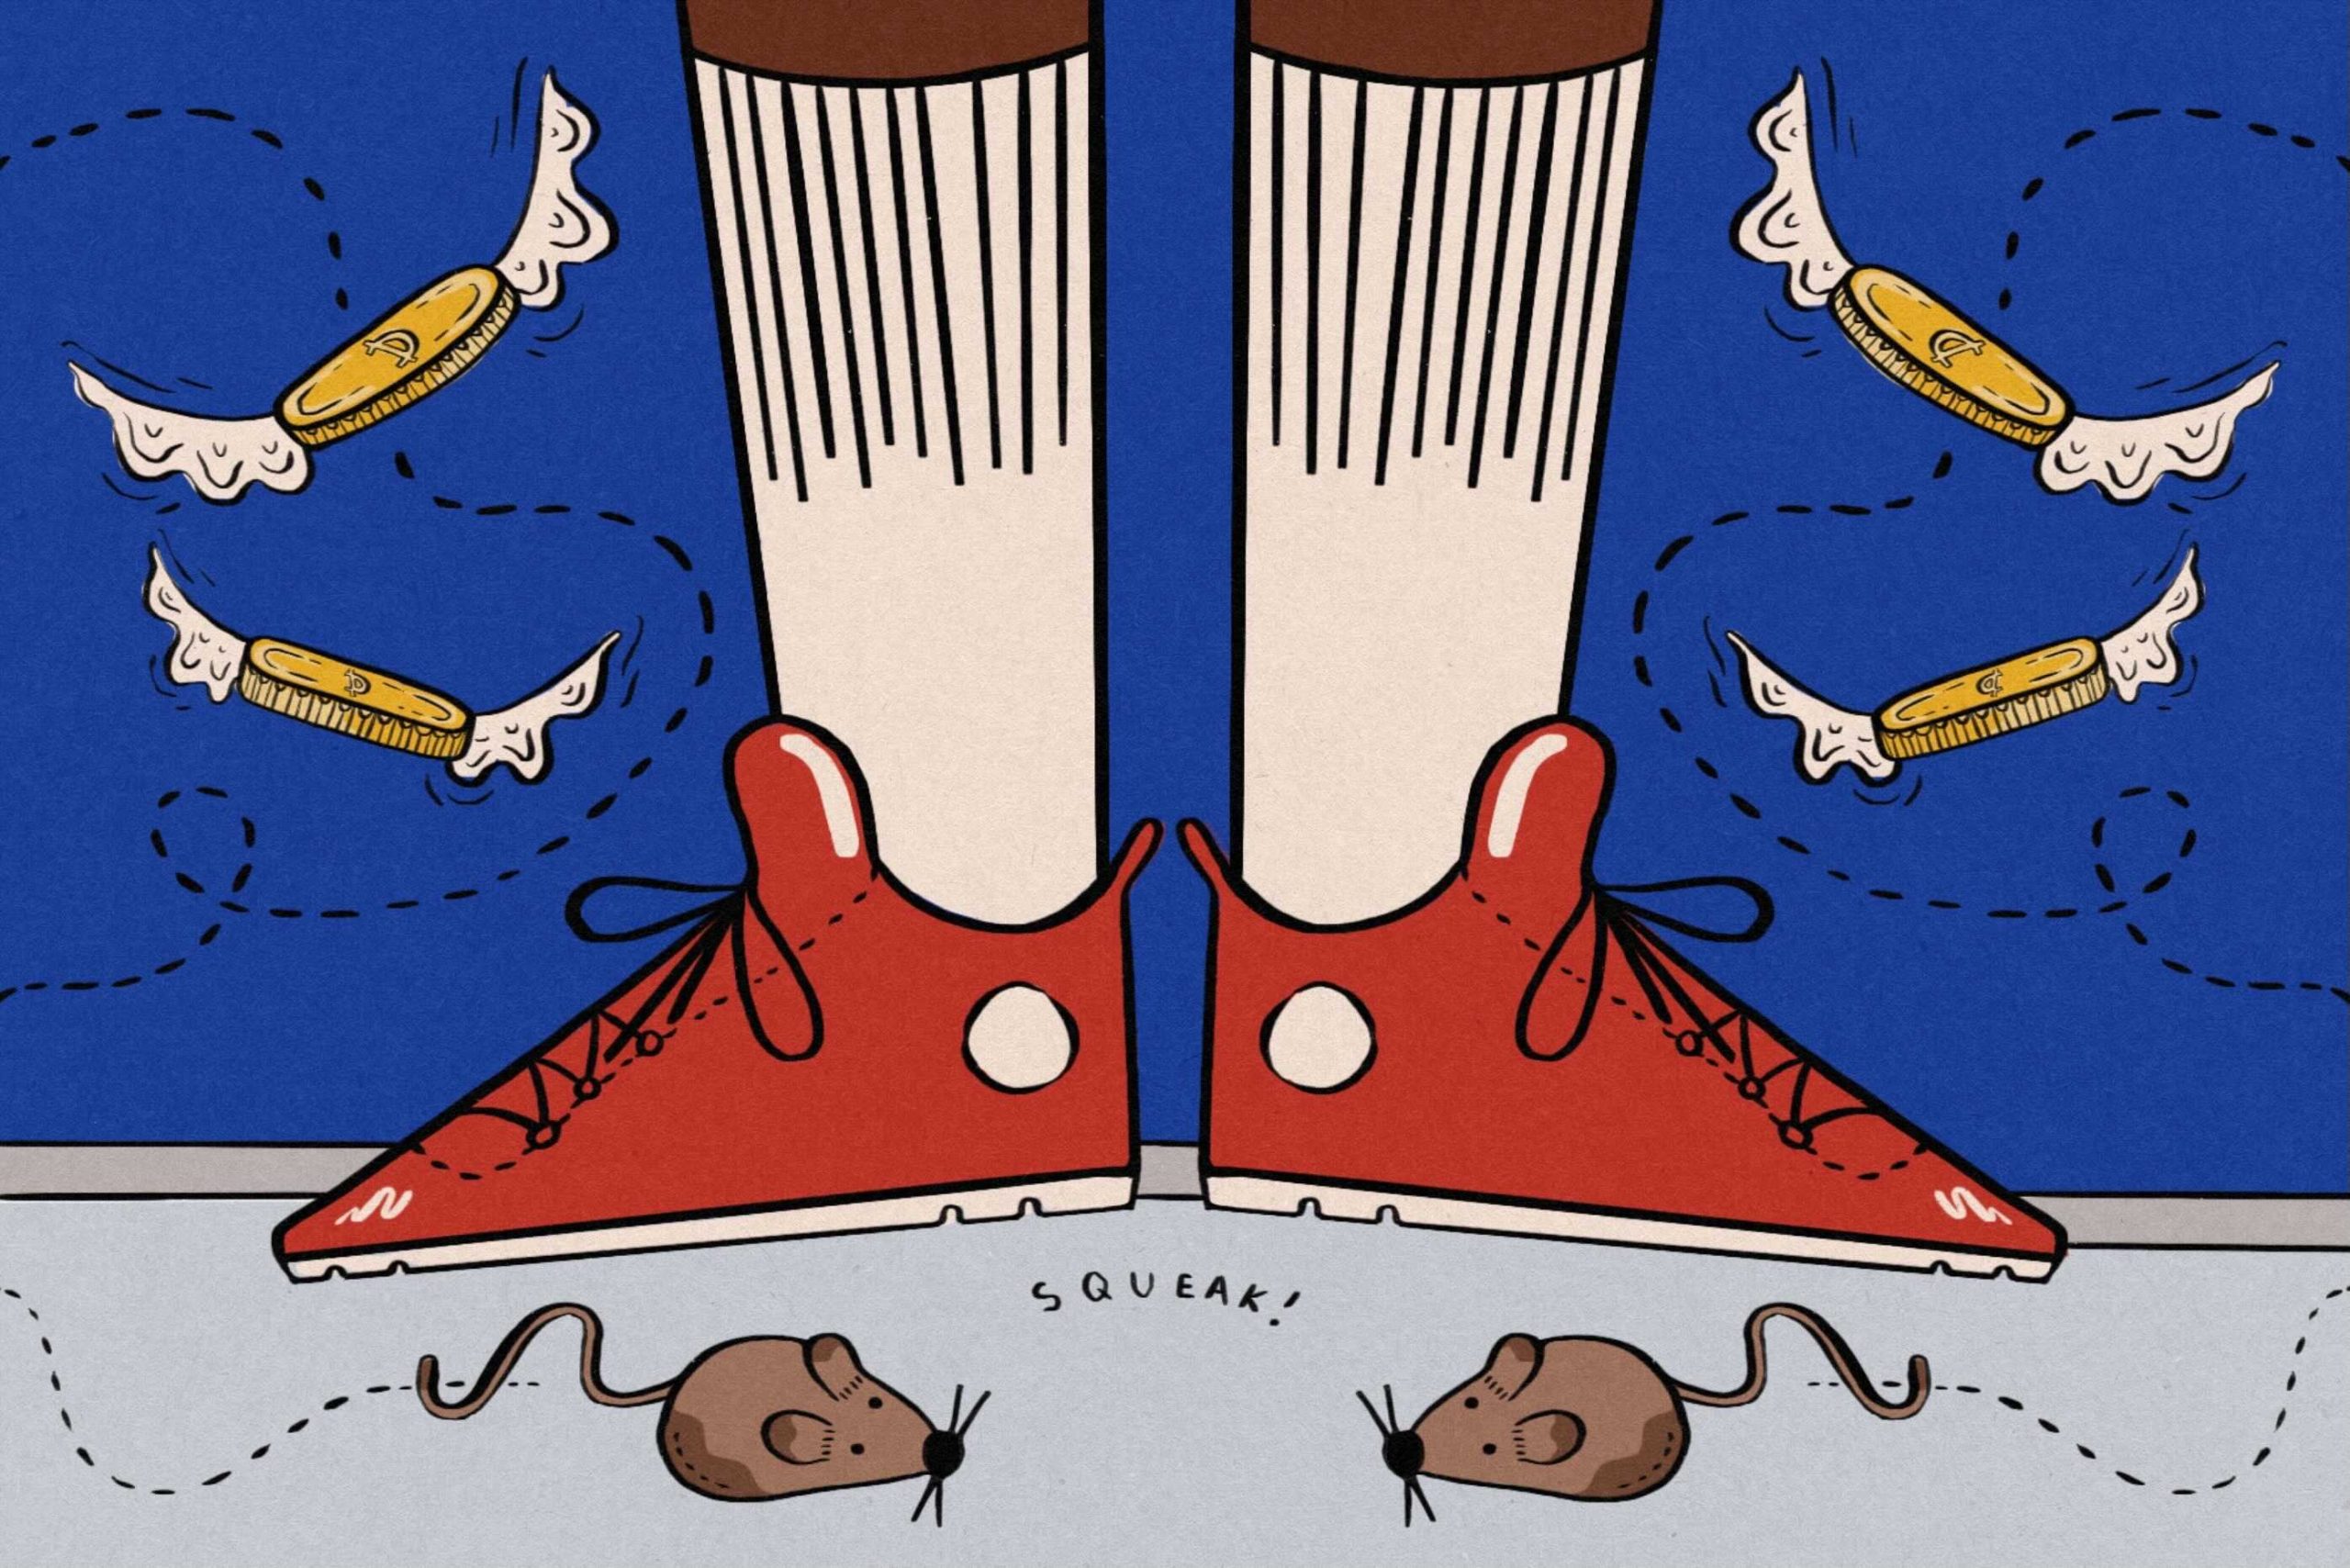 In an article about living conditions at HBCUs, an illustration of a set of legs with rats on the ground